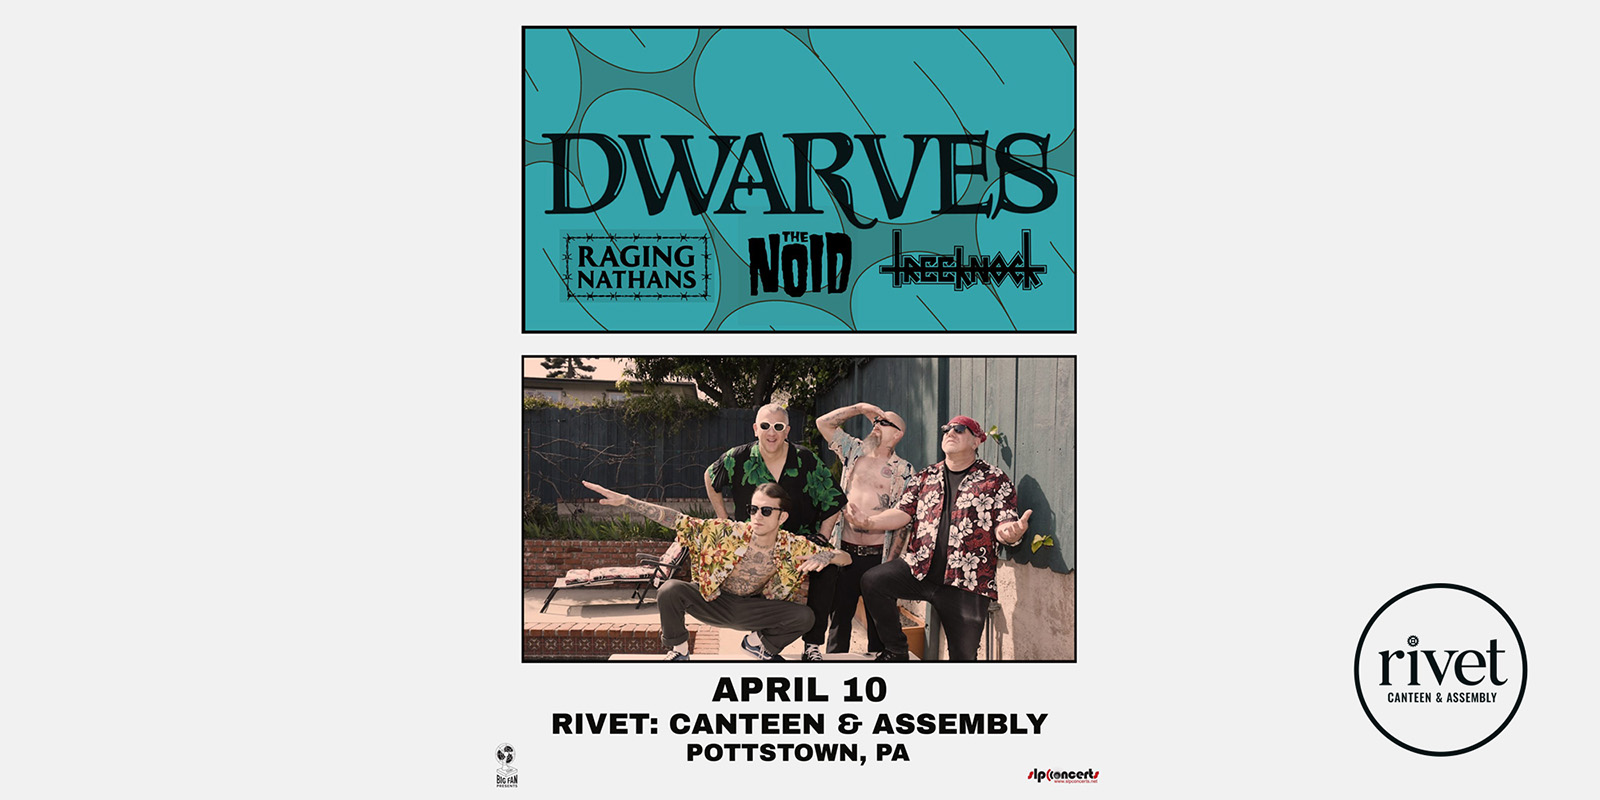 The Dwarves performing live at Rivet: Canteen & Assembly on Wednesday, April 10th, 2024 with Raging Nathans, The Noid, and Treeknock. Doors: 7:00 PM. All ages are welcome. Get your tickets now and be a part of the madness: This one's gonna be wild!